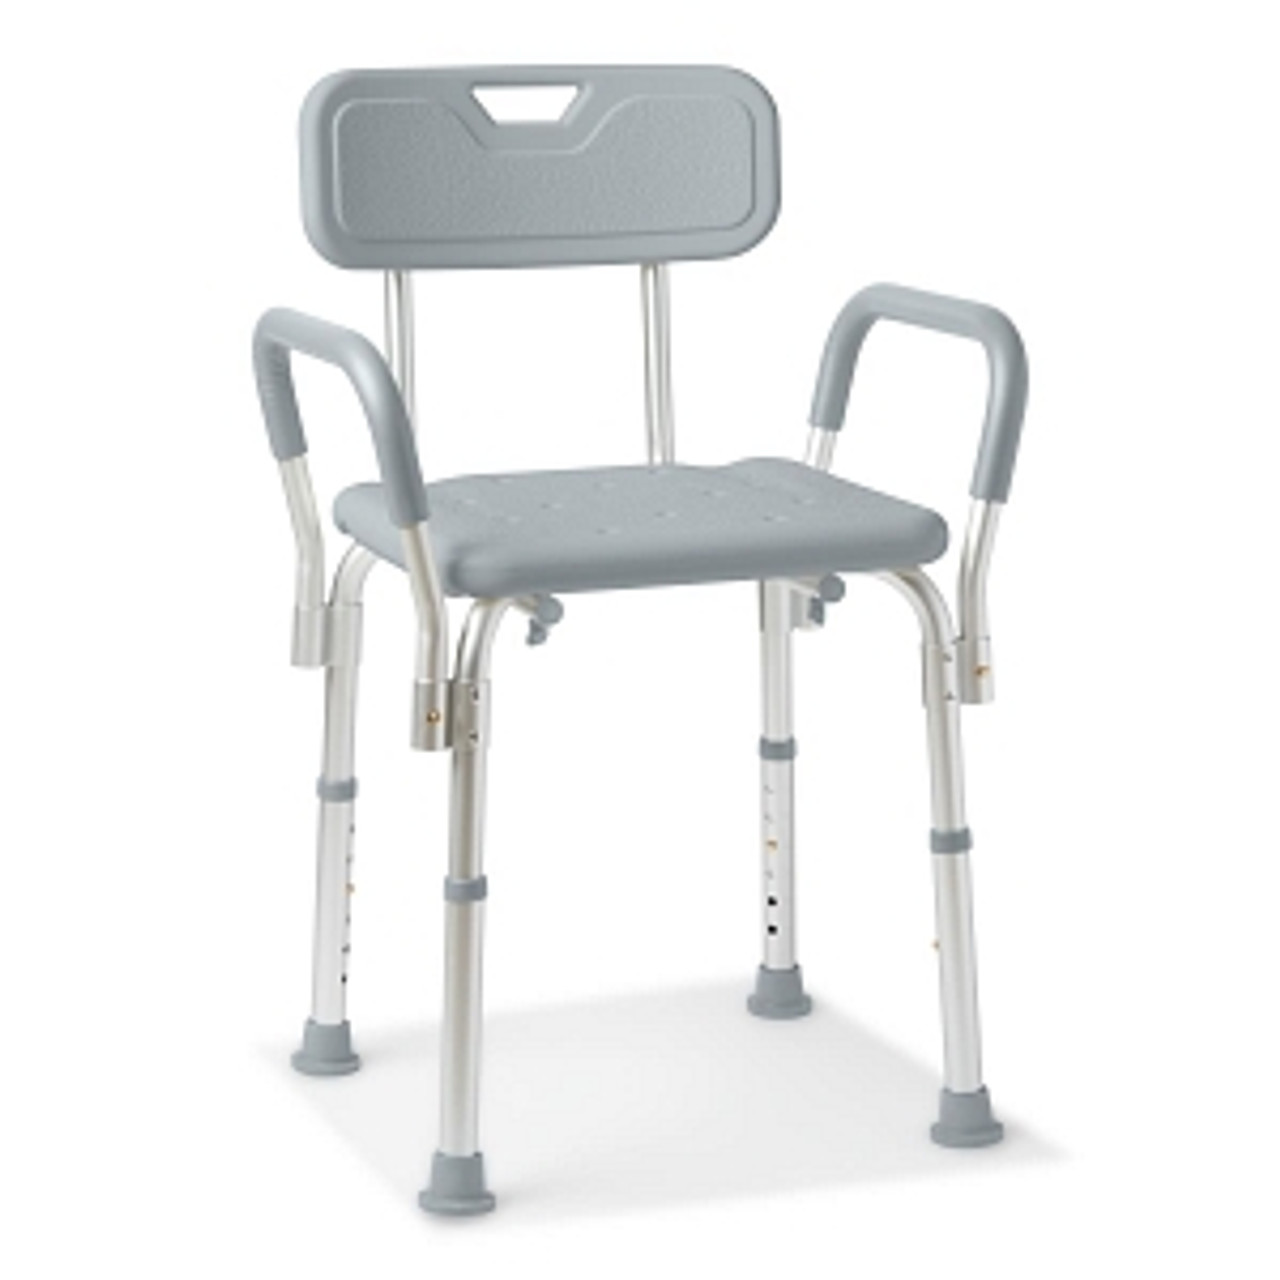 Shower chair with back and arms
Tool-free assembly
350 lb. weight capacity
Comes in retail packaging